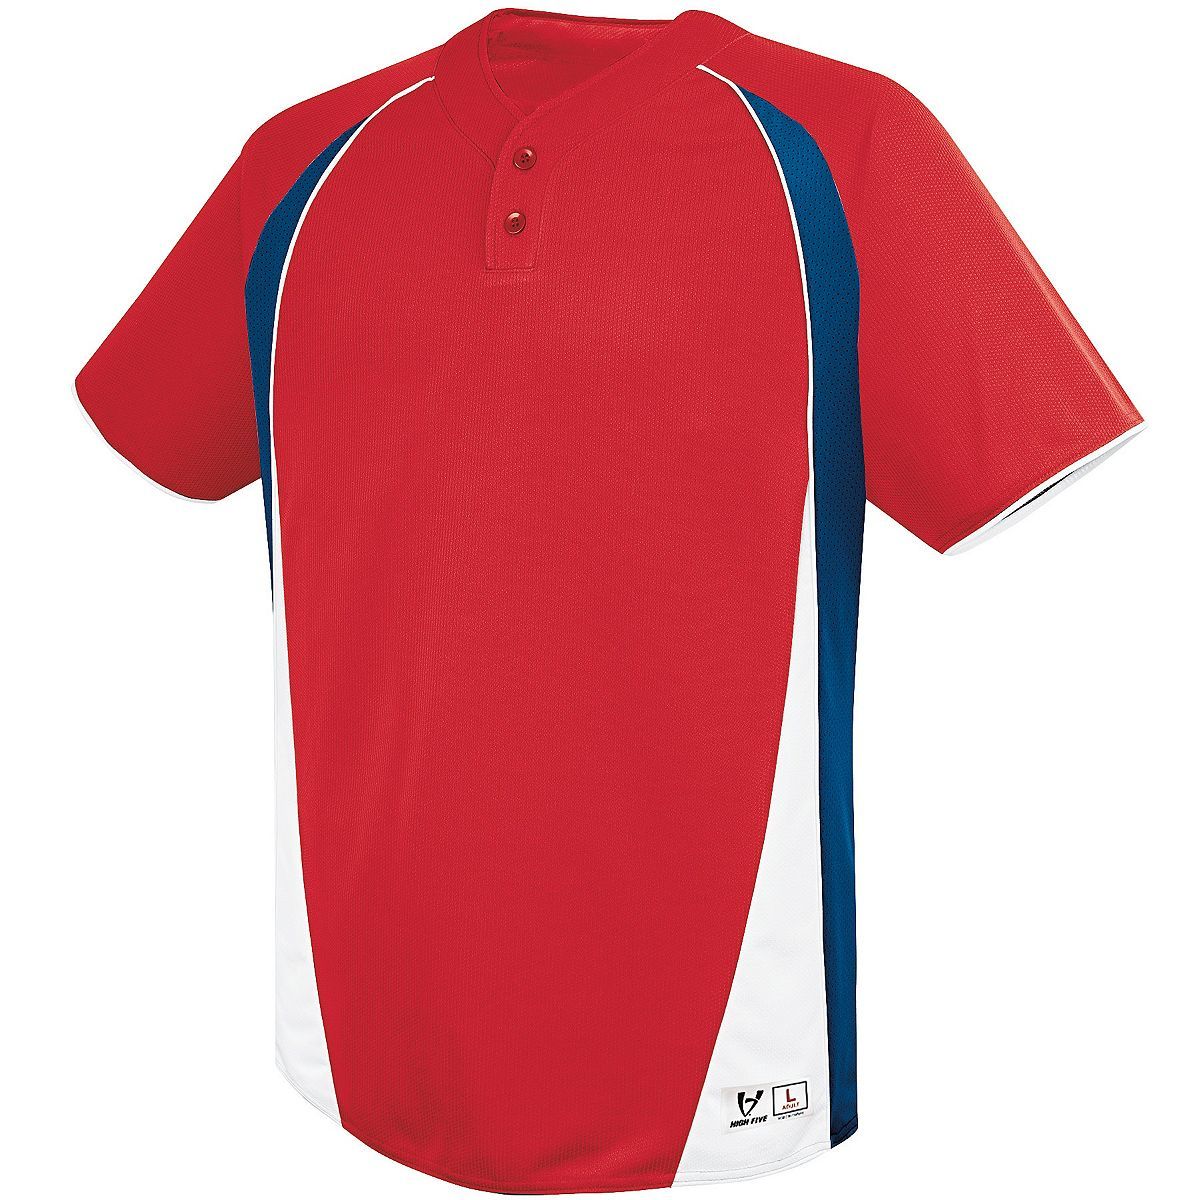 Augusta Sportswear Youth Ace Two-Button Jersey in Scarlet/Navy/White  -Part of the Youth, Youth-Jersey, Augusta-Products, Baseball, Shirts, All-Sports, All-Sports-1 product lines at KanaleyCreations.com